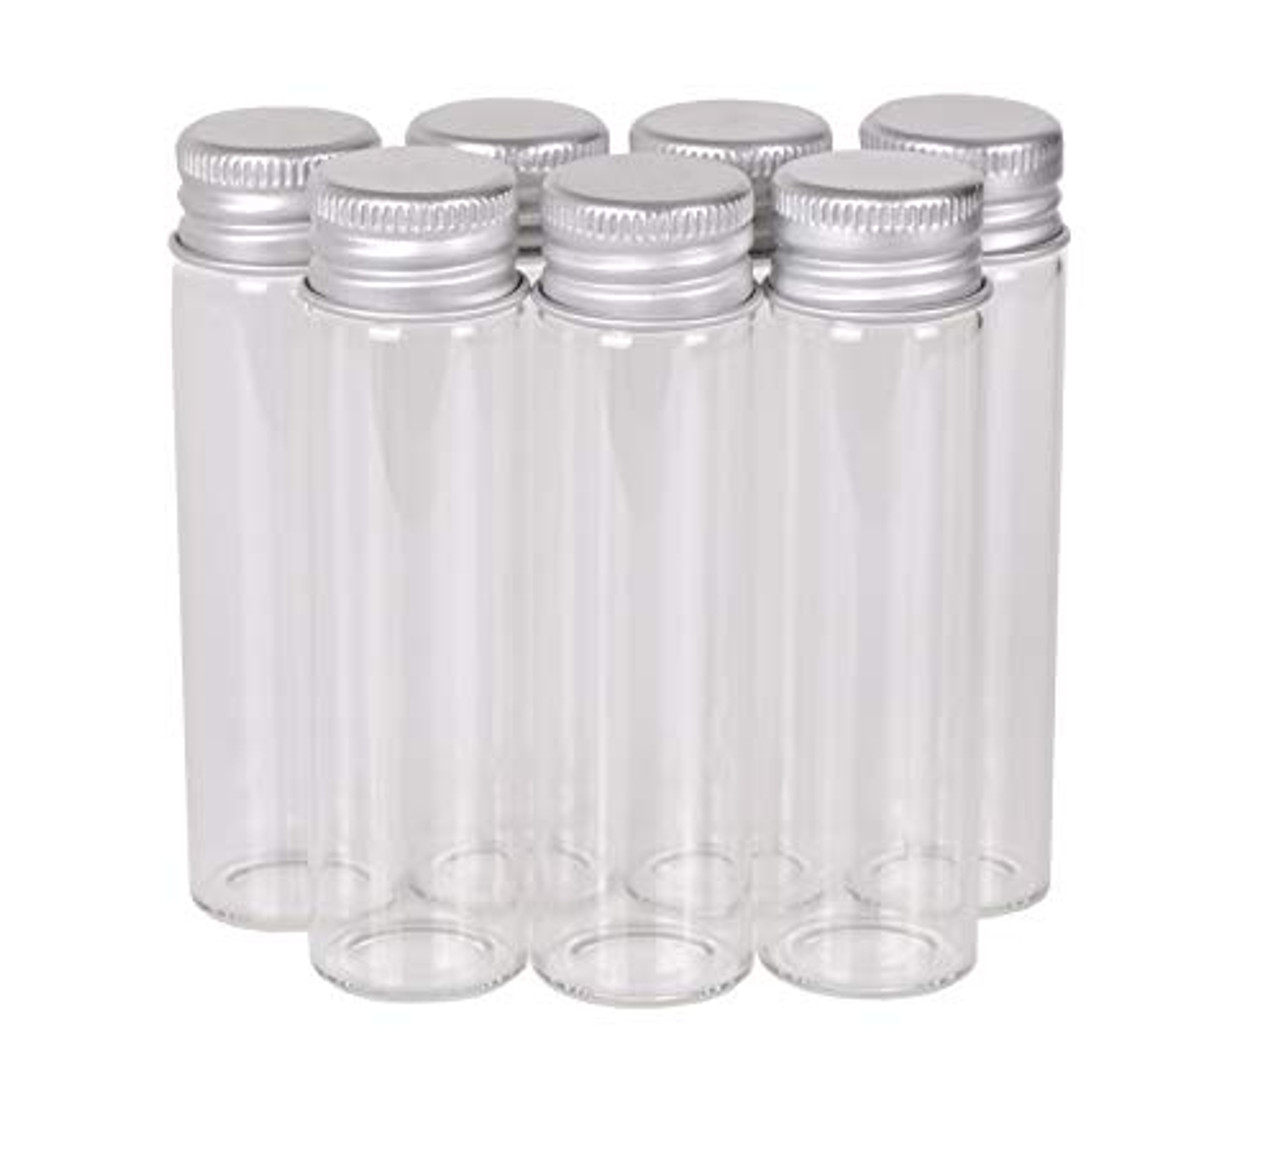 MaxMau Pack of 100, 20ml Small Glass Bottles with Metal Cap Screw Top Lids  Tiny Vials Mini Jars Glass Tube for Beads Glitter Seed Samplers Storage